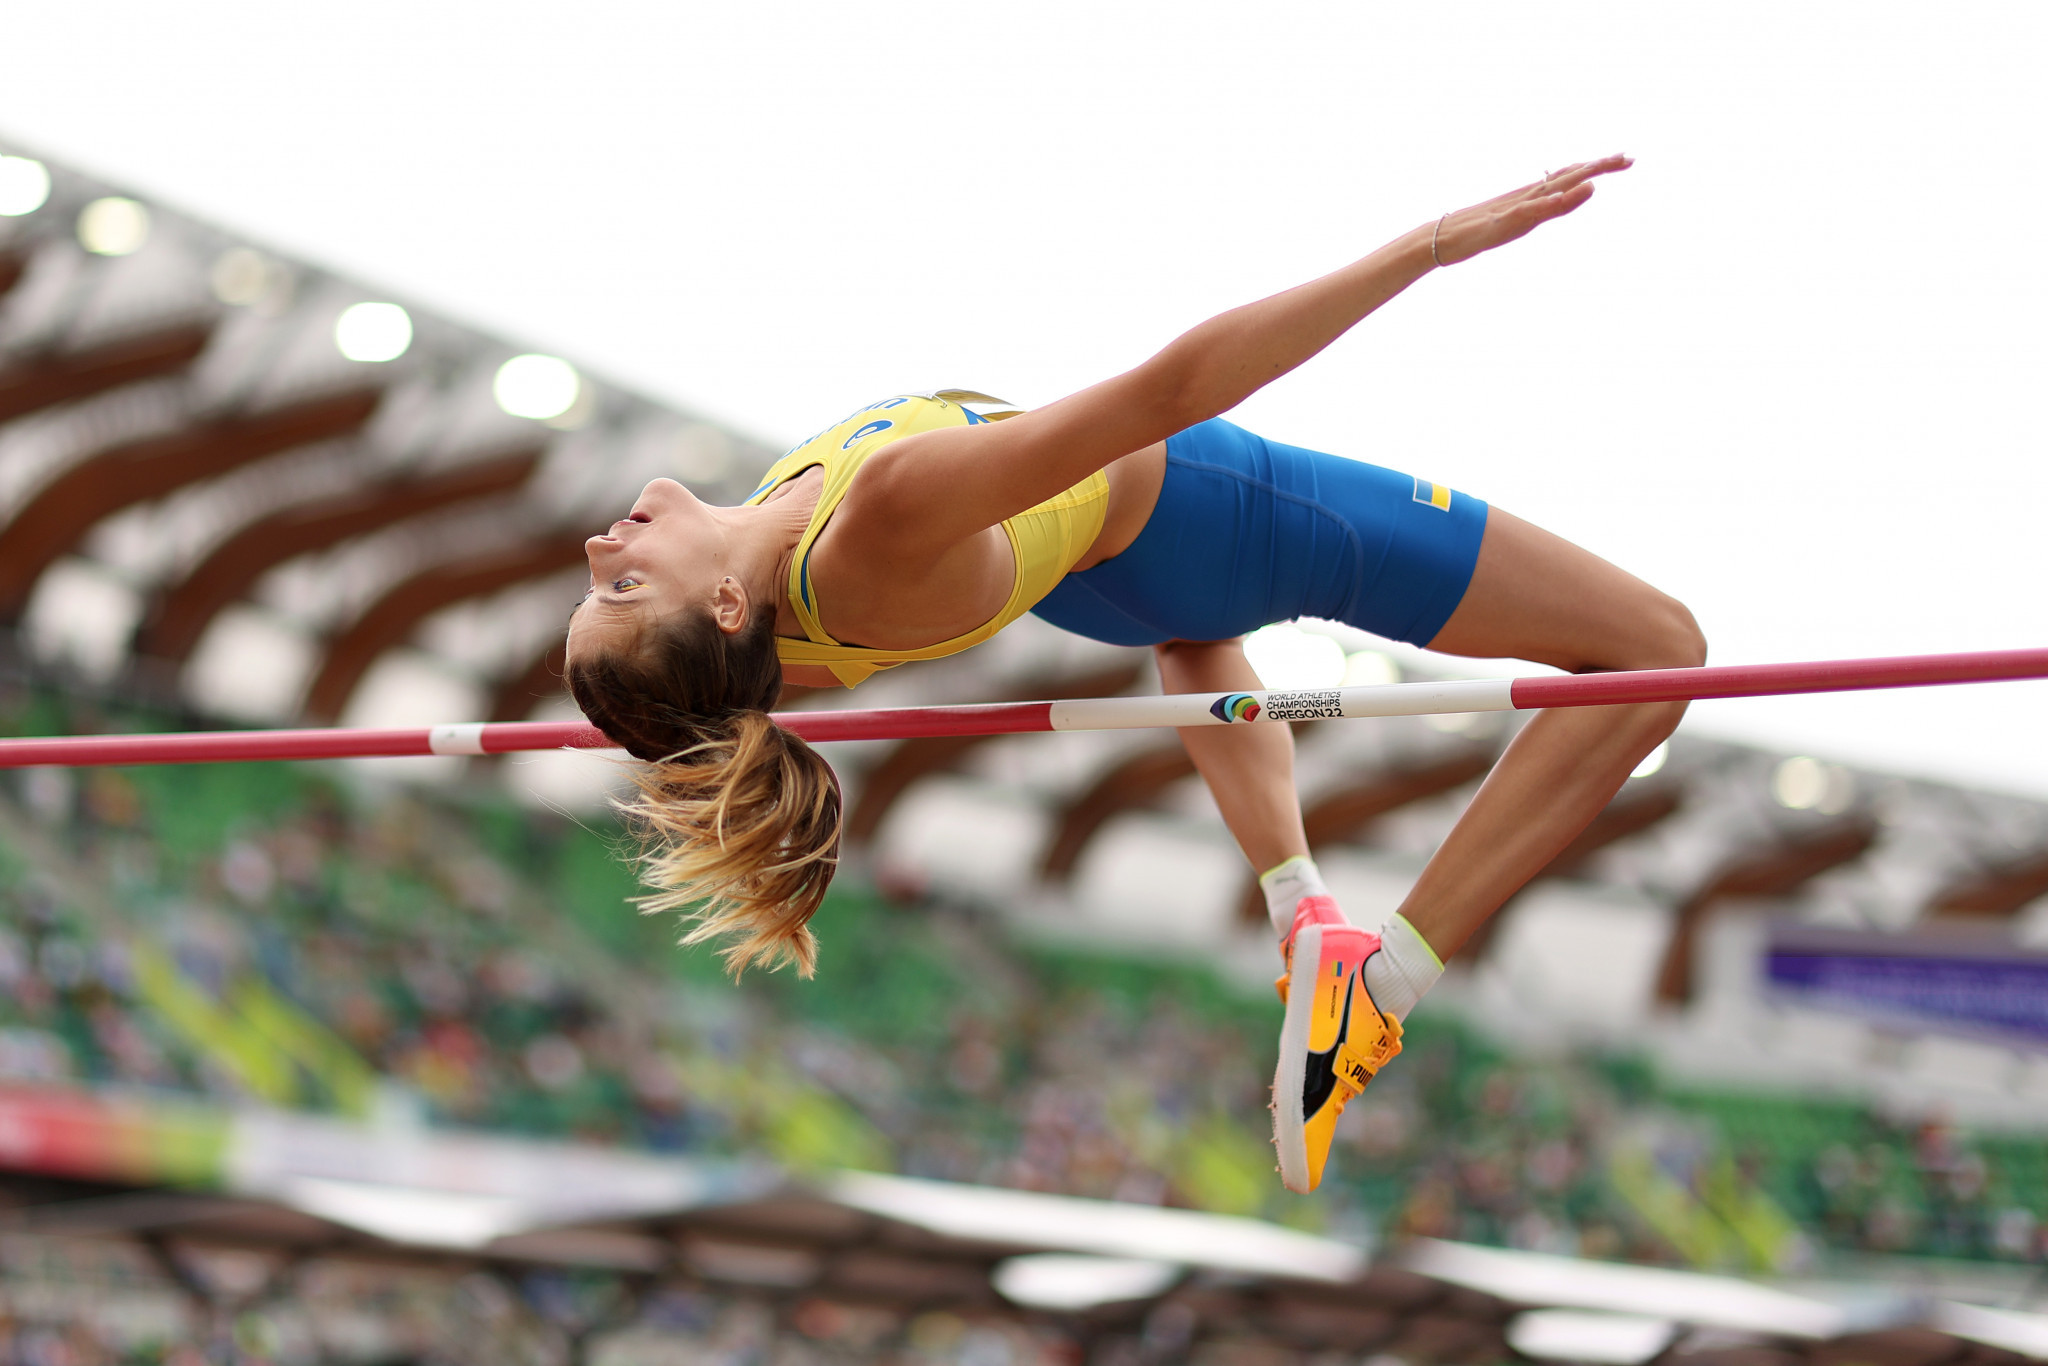 Ukraine's Olympic silver medallist Yaroslava Mahuchikh qualified comfortably for the final of the high jump ©Getty Images